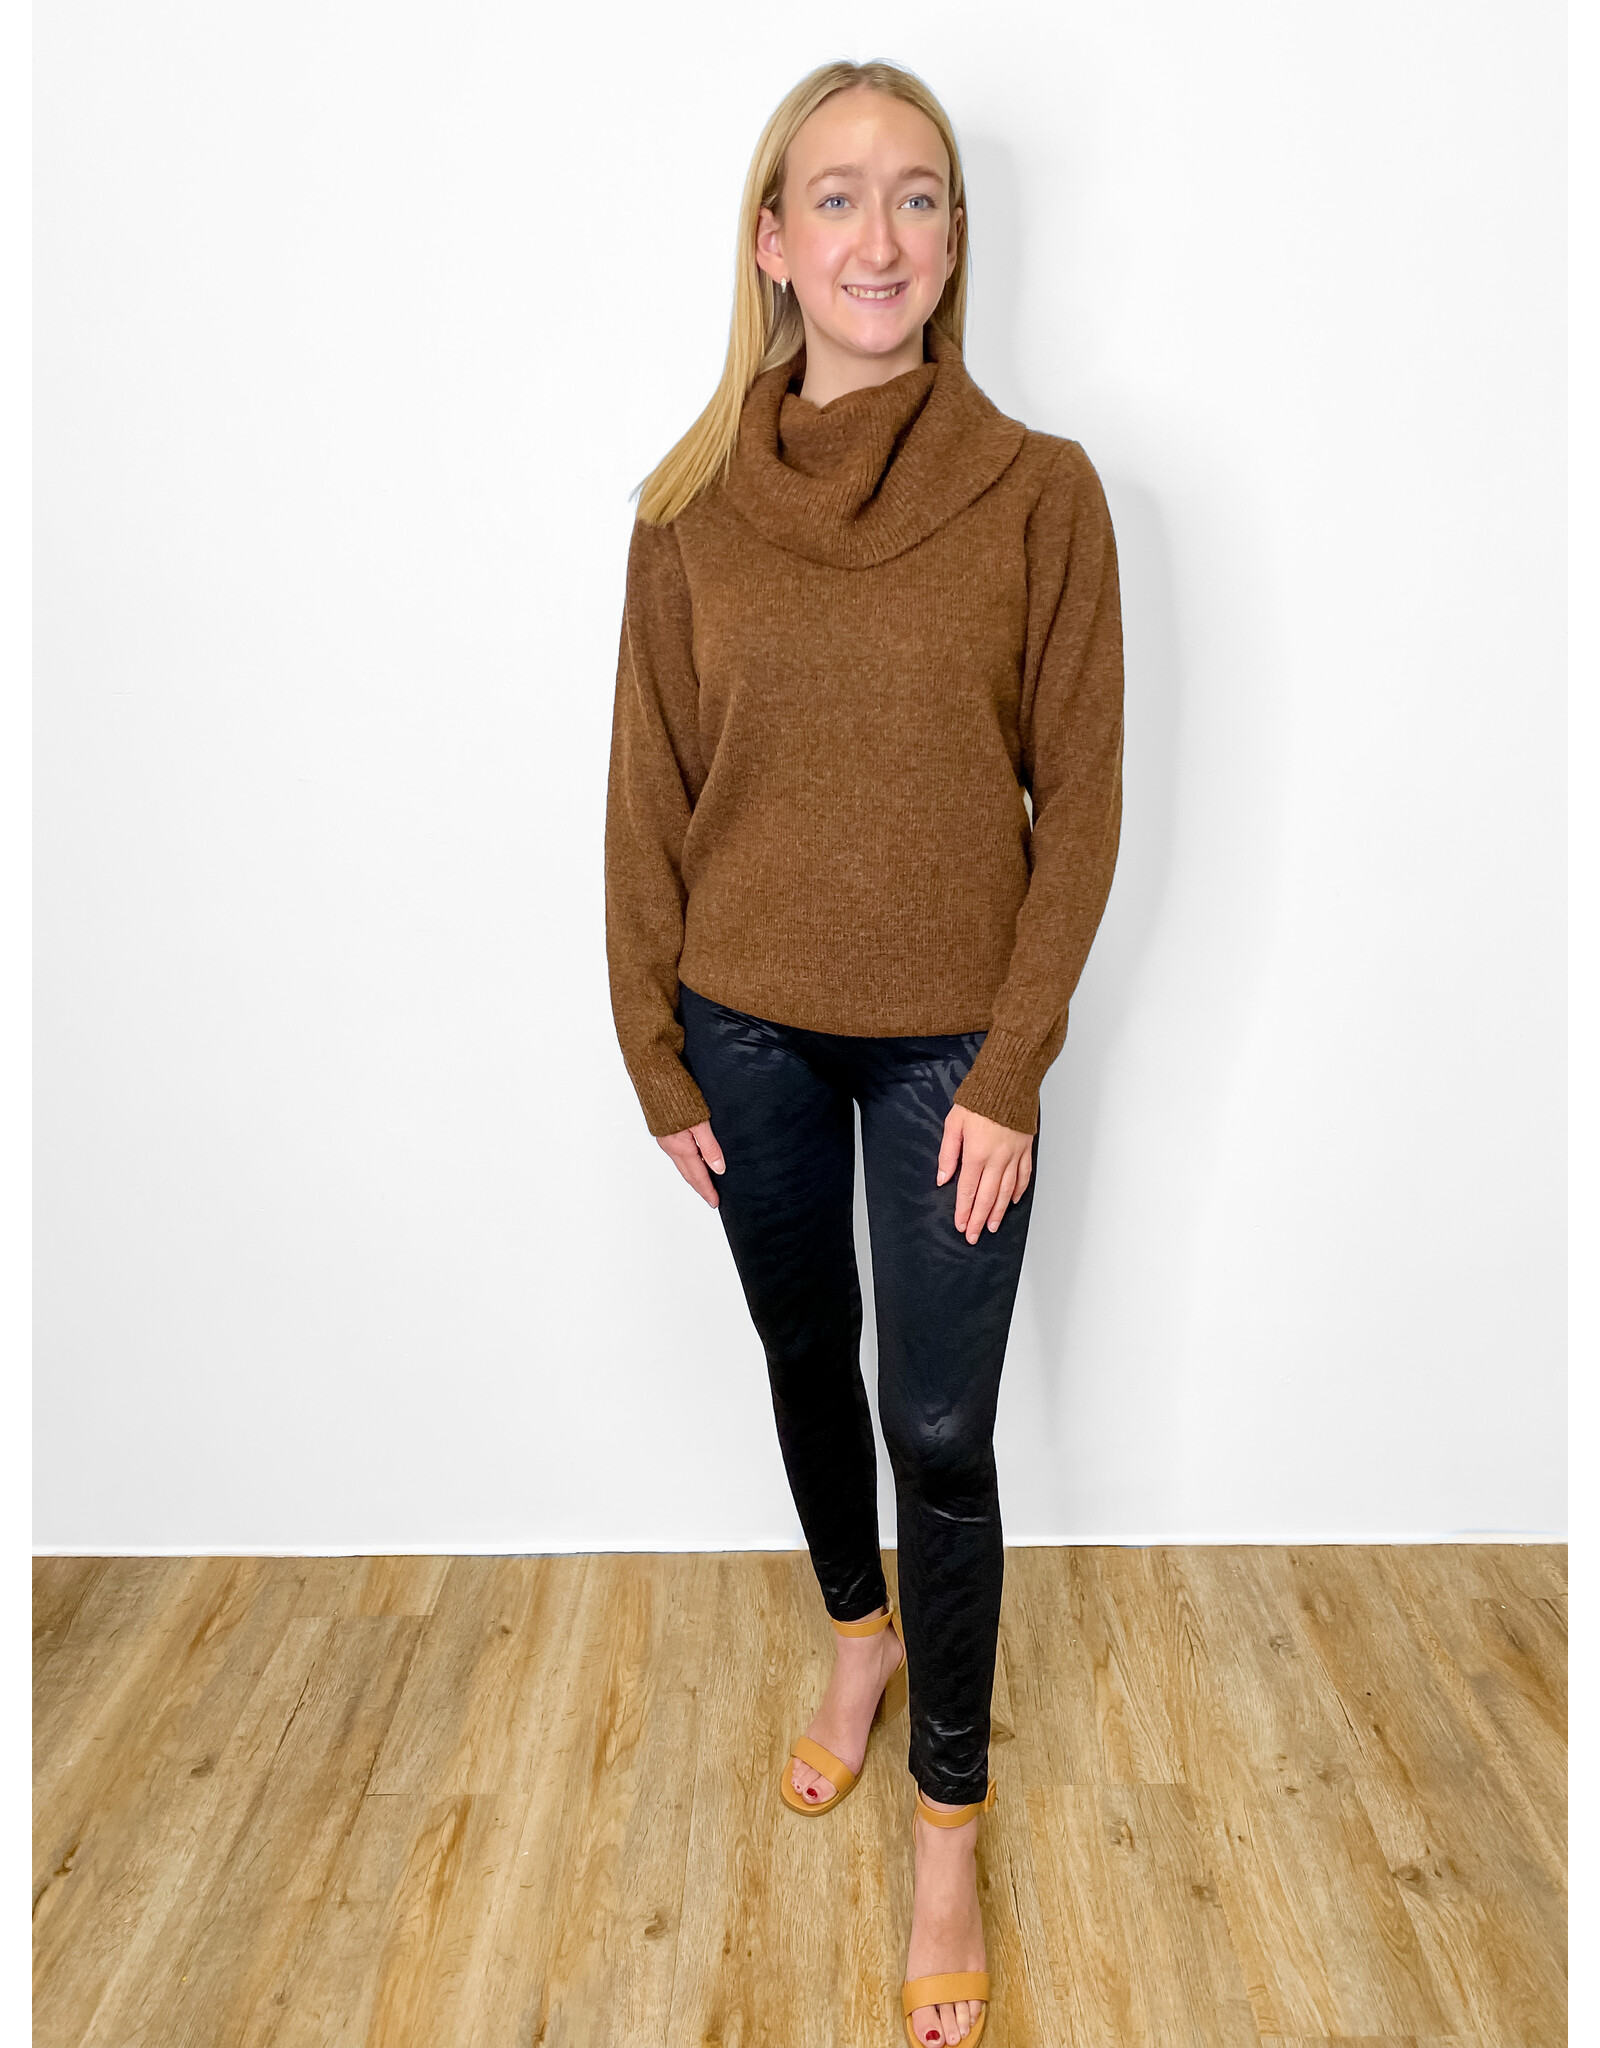 Charlie Paige Friar Brown Cammy Sweater